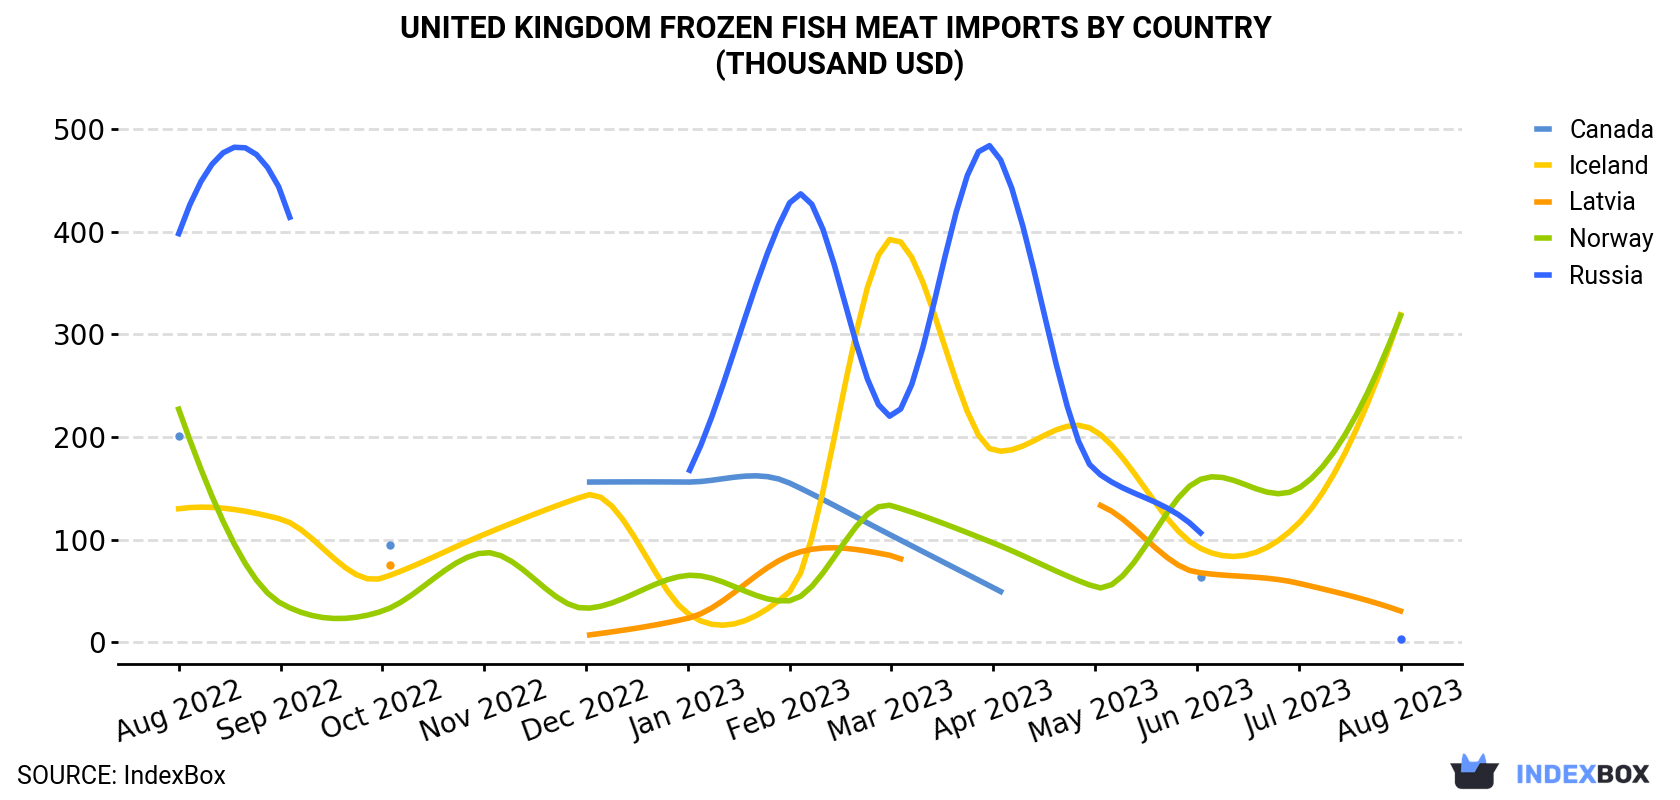 United Kingdom Frozen Fish Meat Imports By Country (Thousand USD)